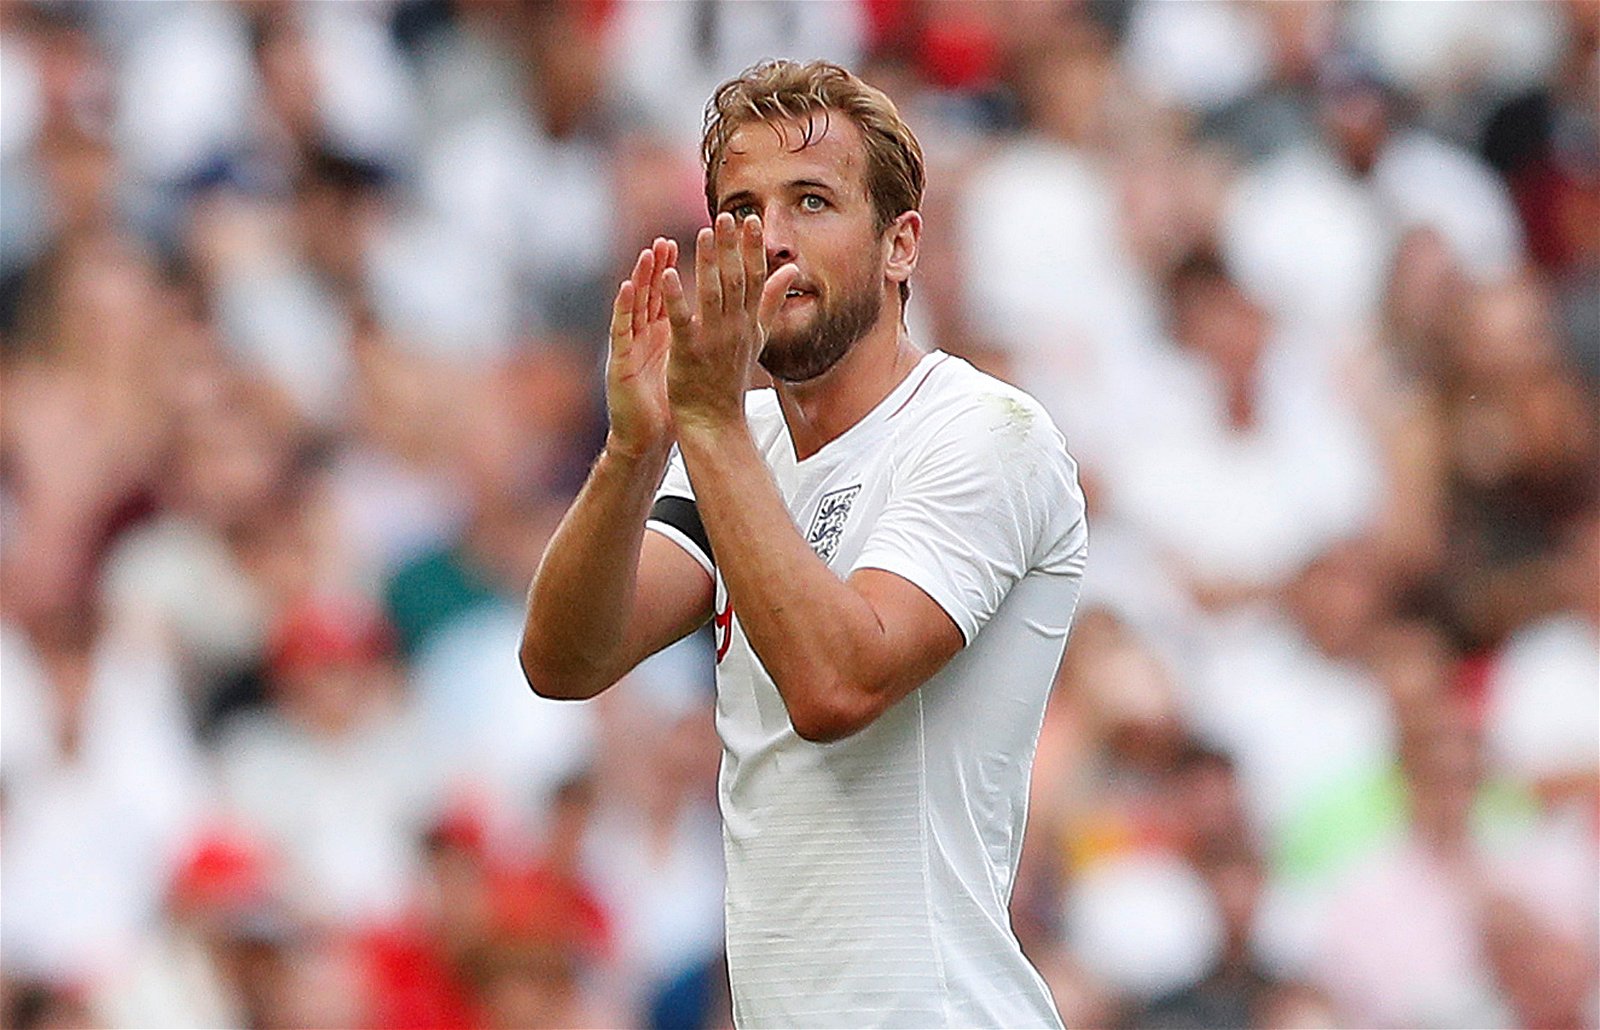 English players to score most goals Harry Kane World Cup 2018